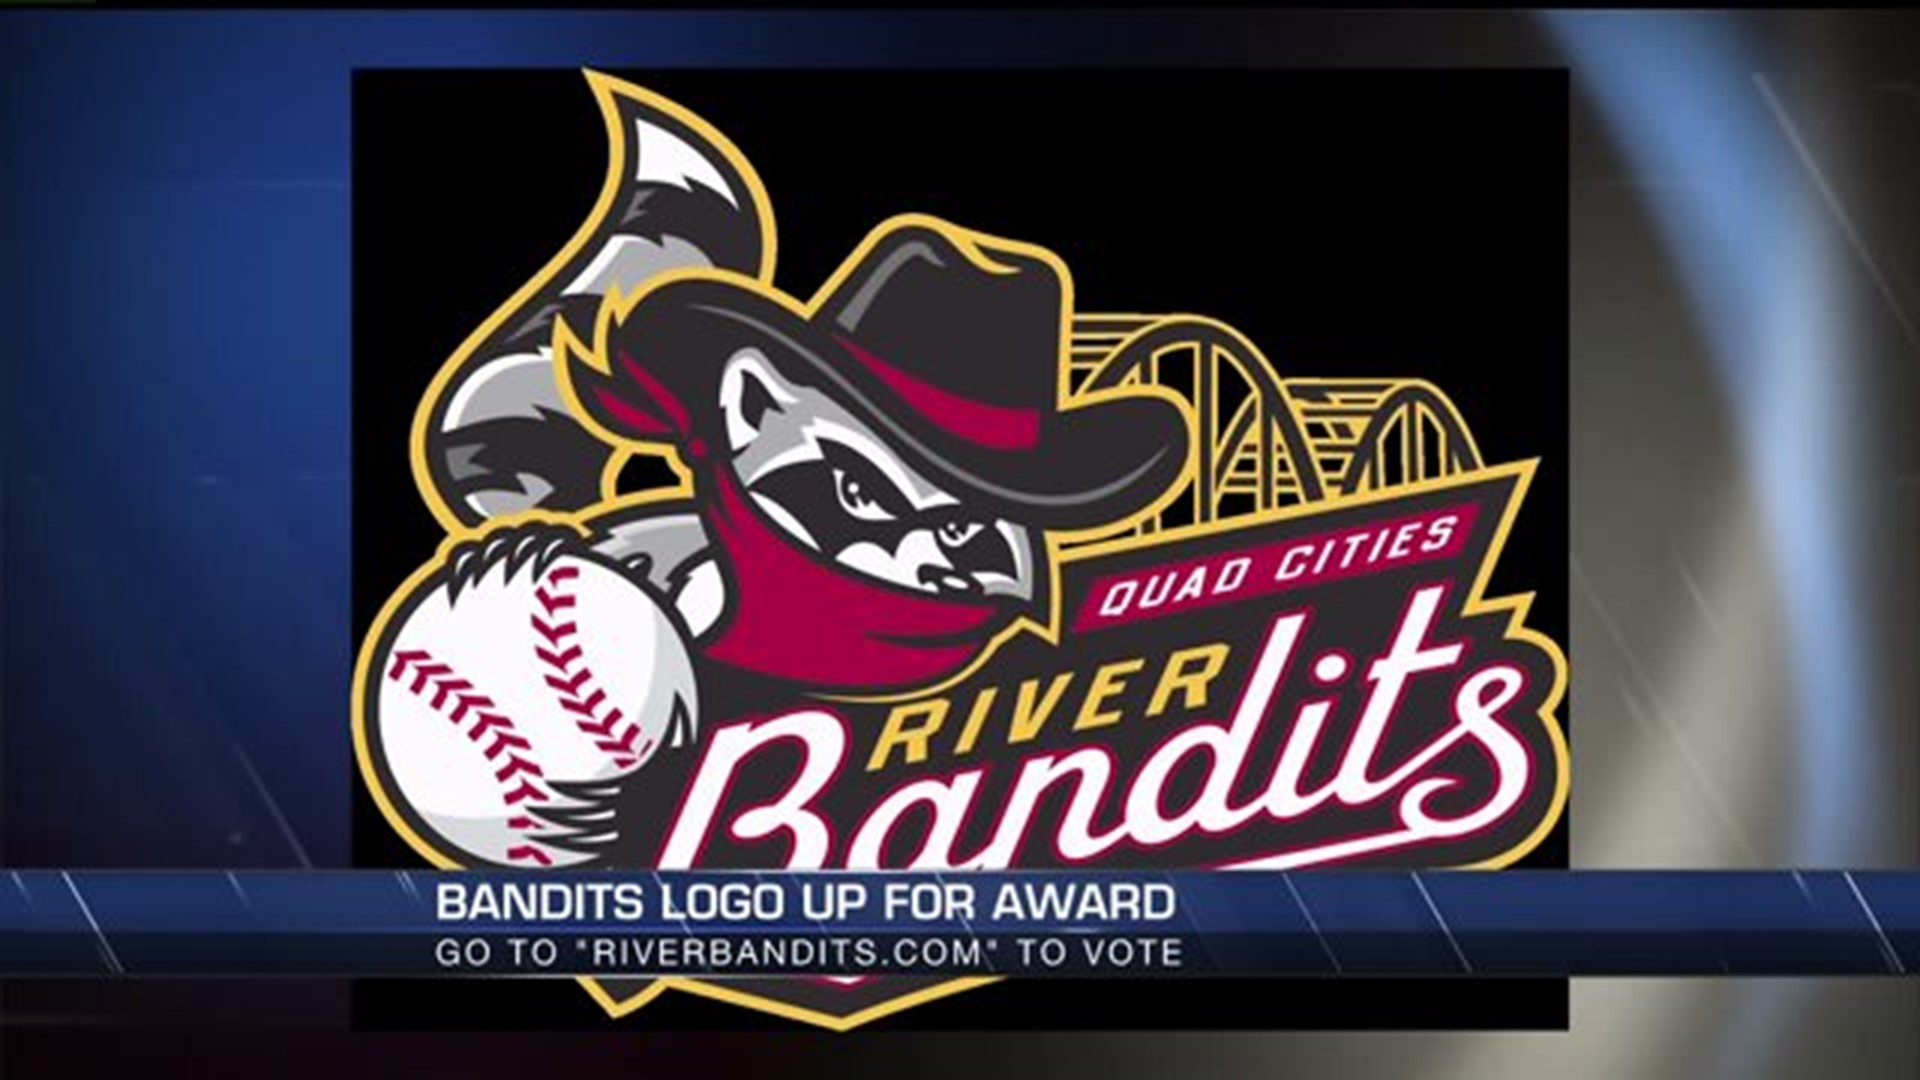 Bandits' logo part of contest for best in the minor league